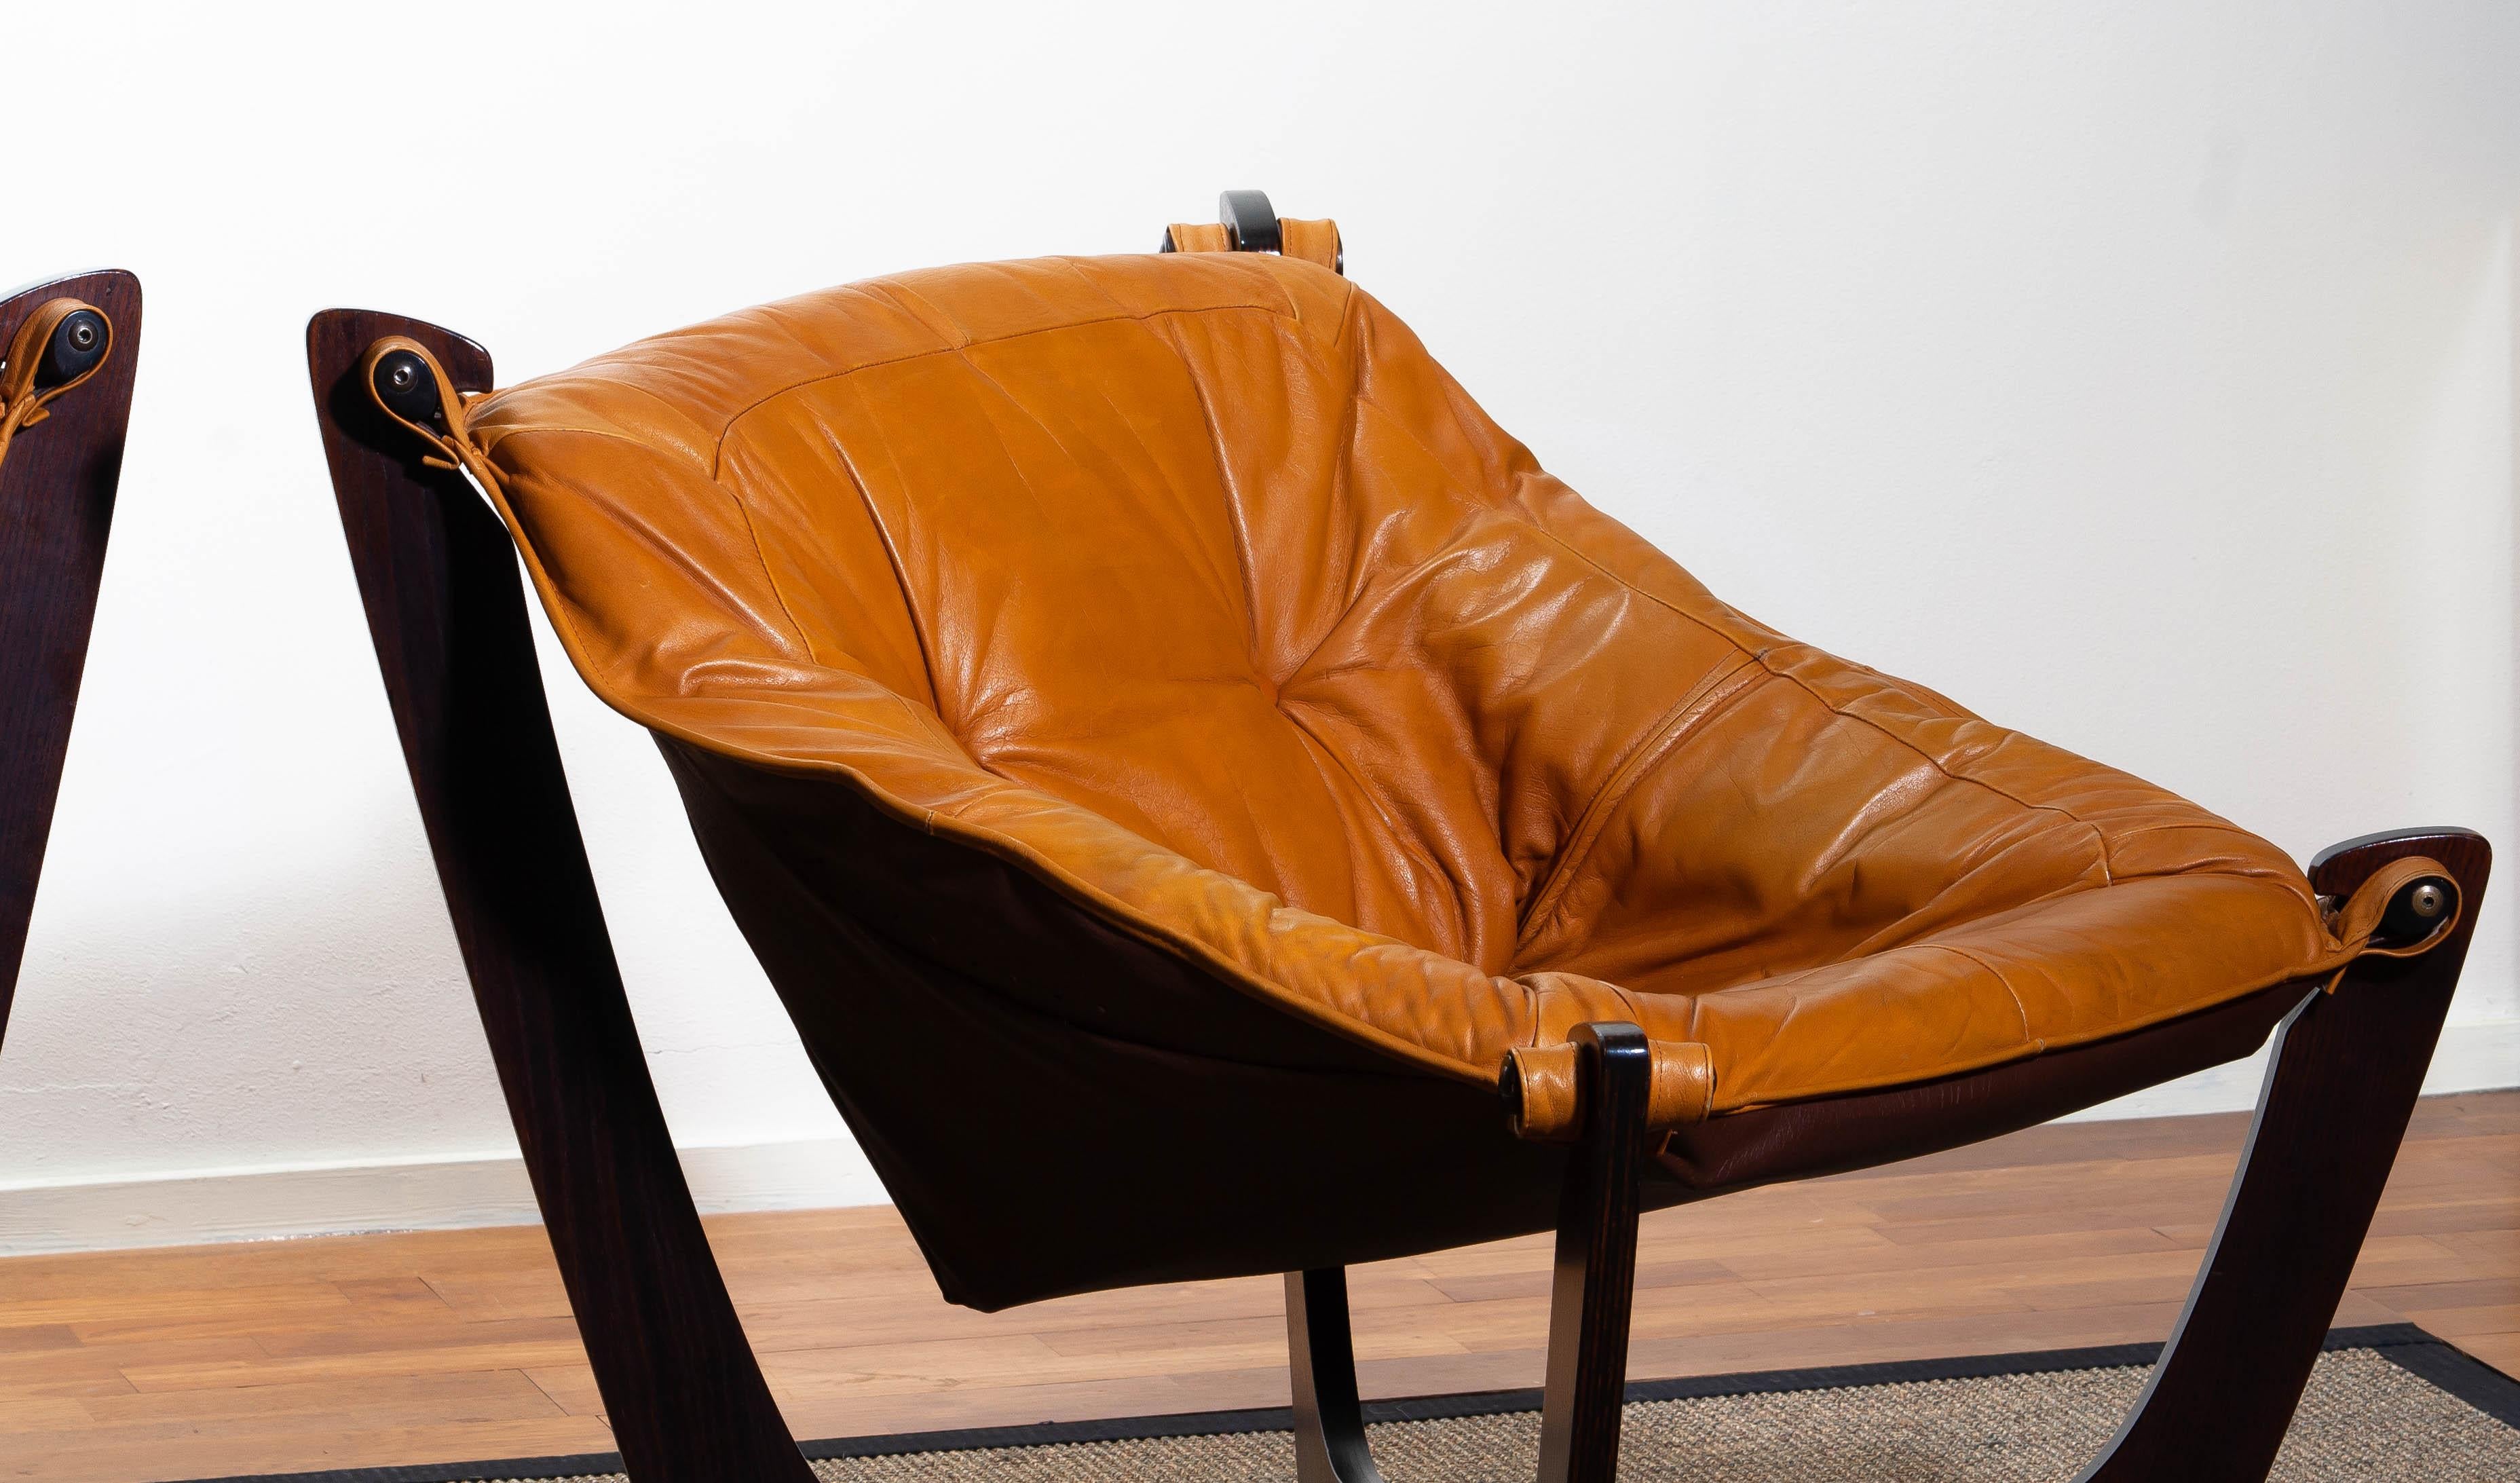 1970 Pair of Leather Lounge Chairs by Odd Knutsen for Hjellegjerde Møbler Norway 3